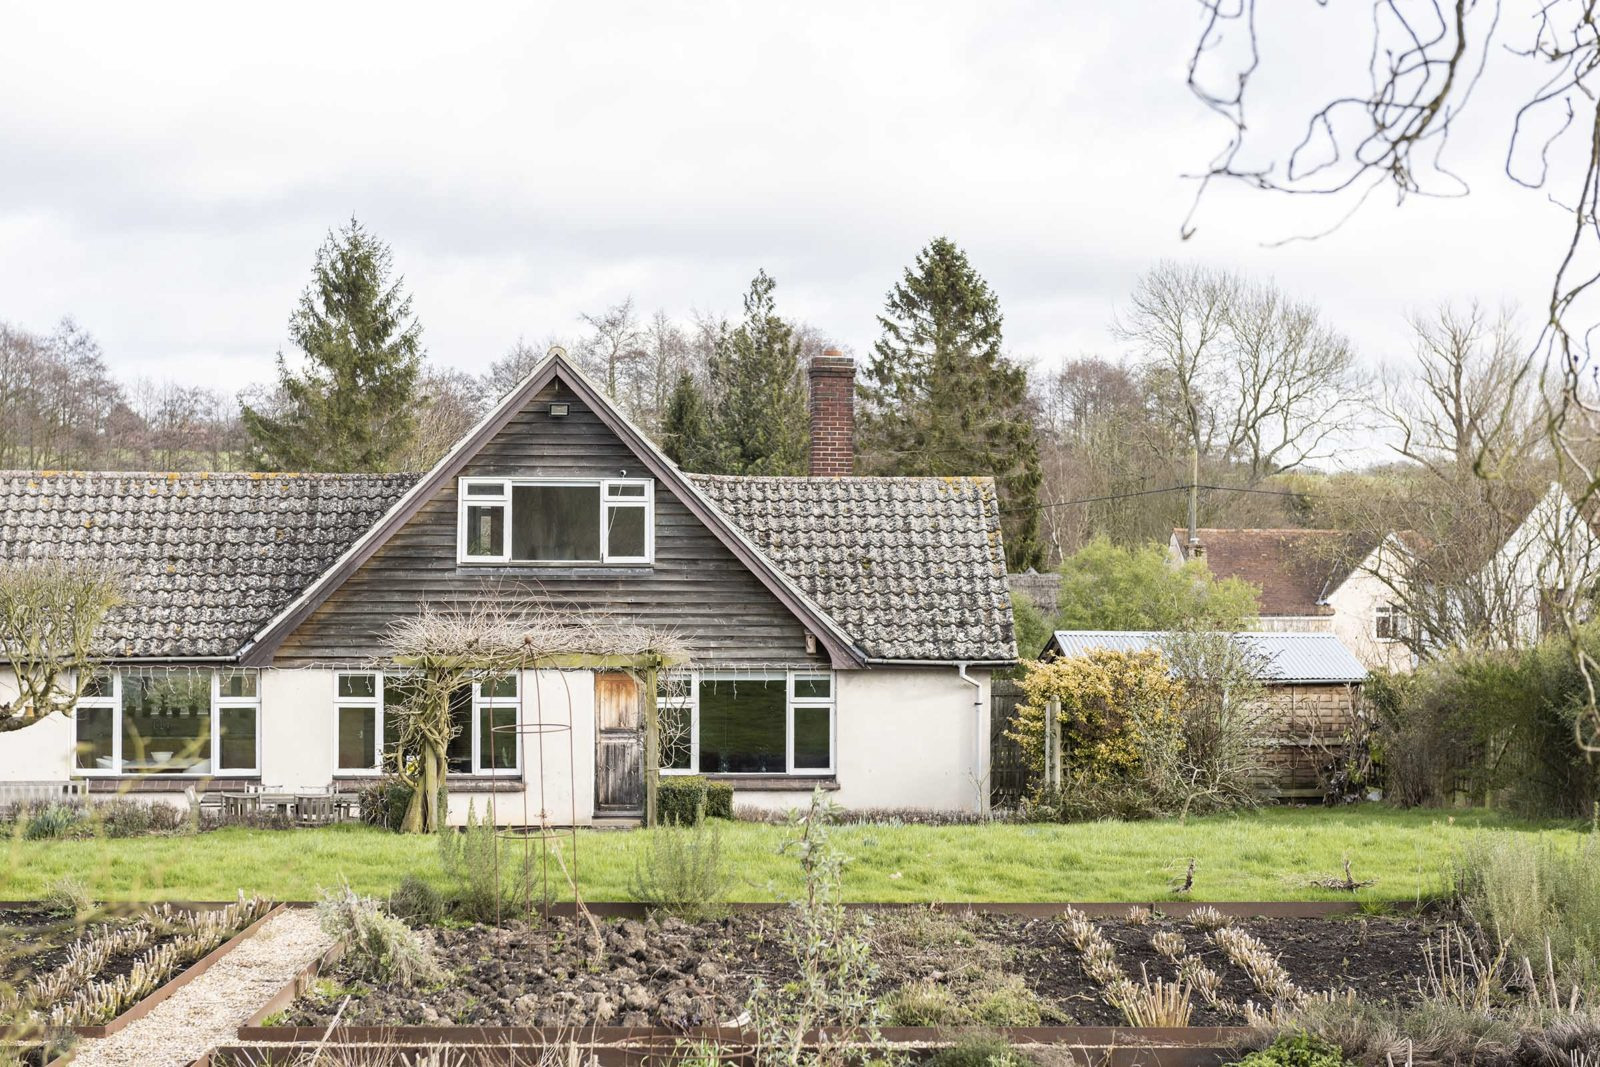 Midcentury ‘chalet bungalow’ for sale in the Suffolk countryside